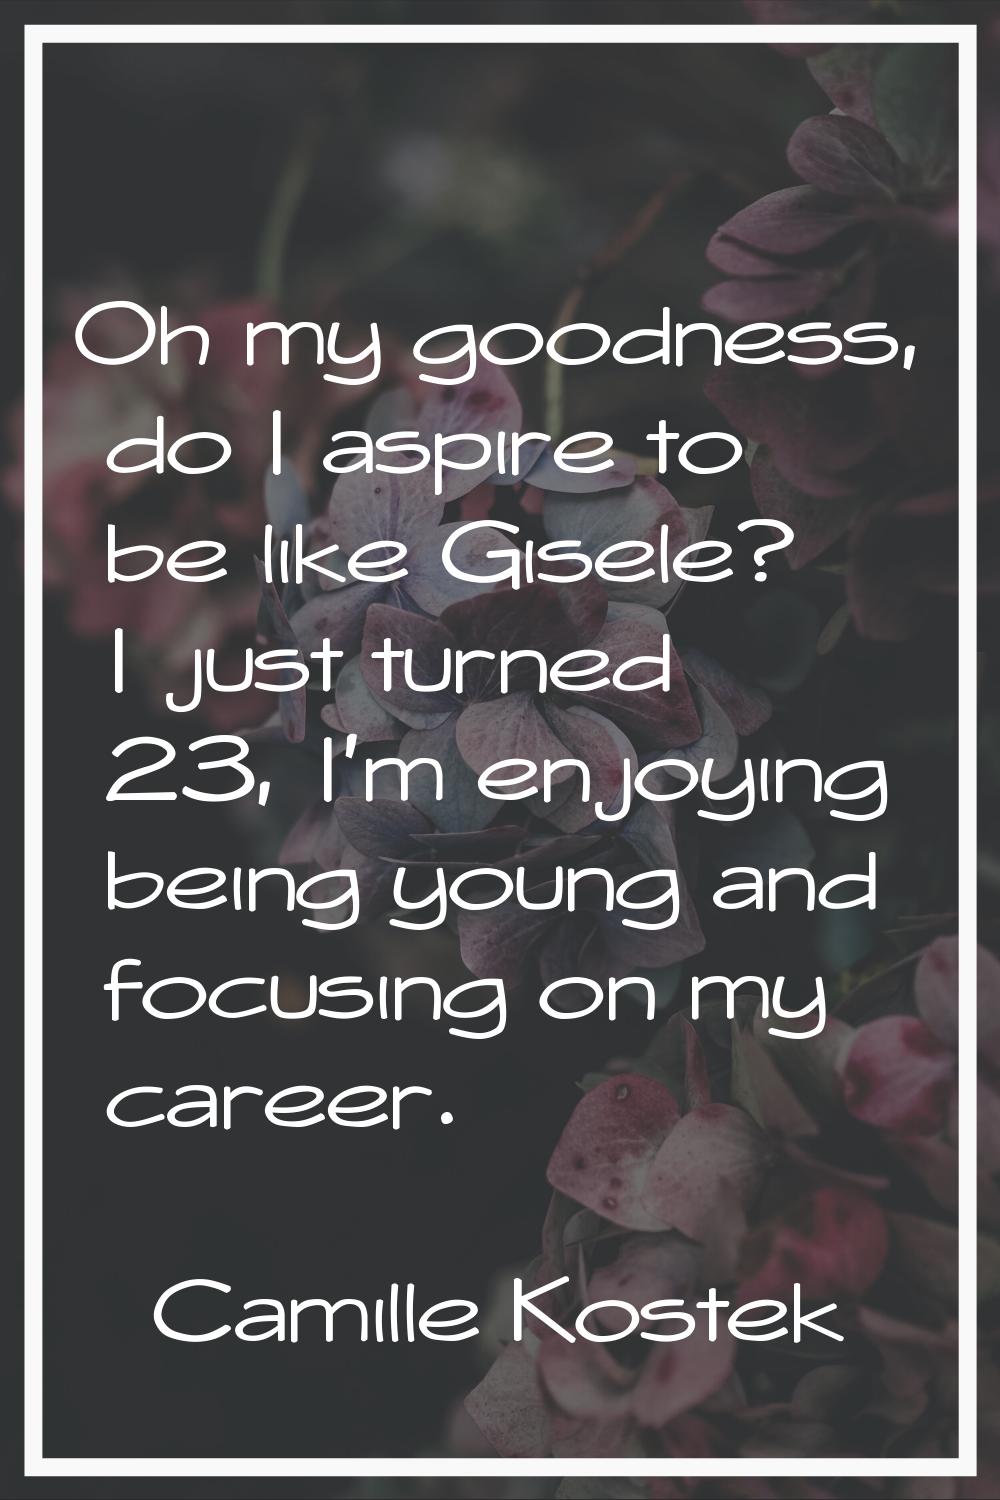 Oh my goodness, do I aspire to be like Gisele? I just turned 23, I'm enjoying being young and focus